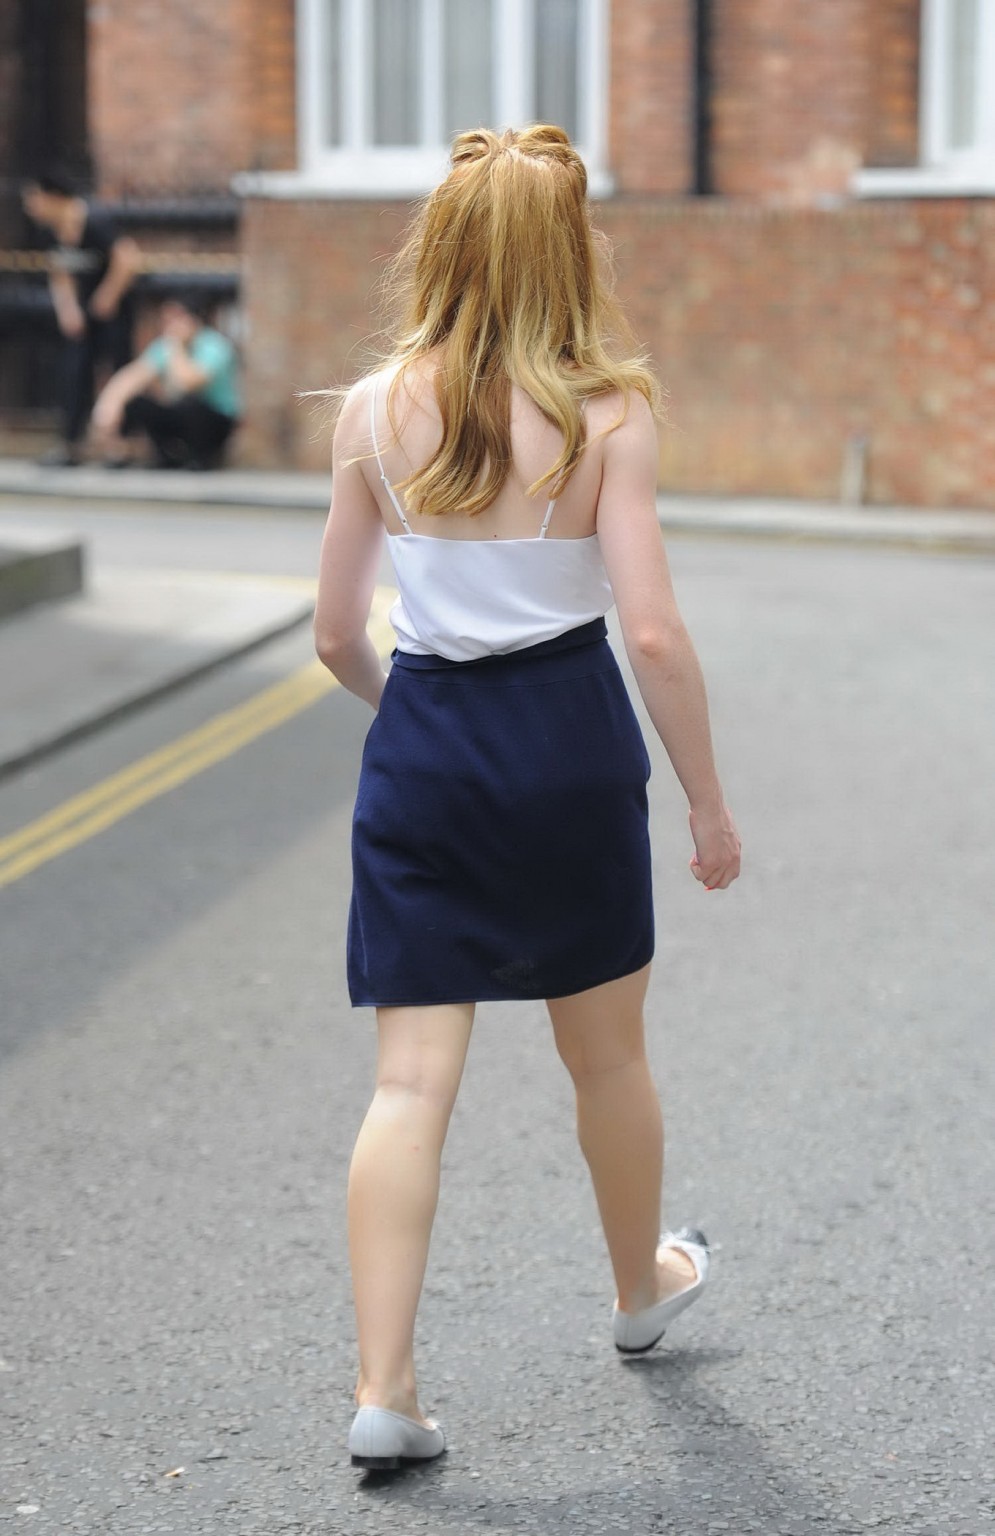 Nicola Roberts braless wearing white sheer top and blue mini skirt out in London #75224196